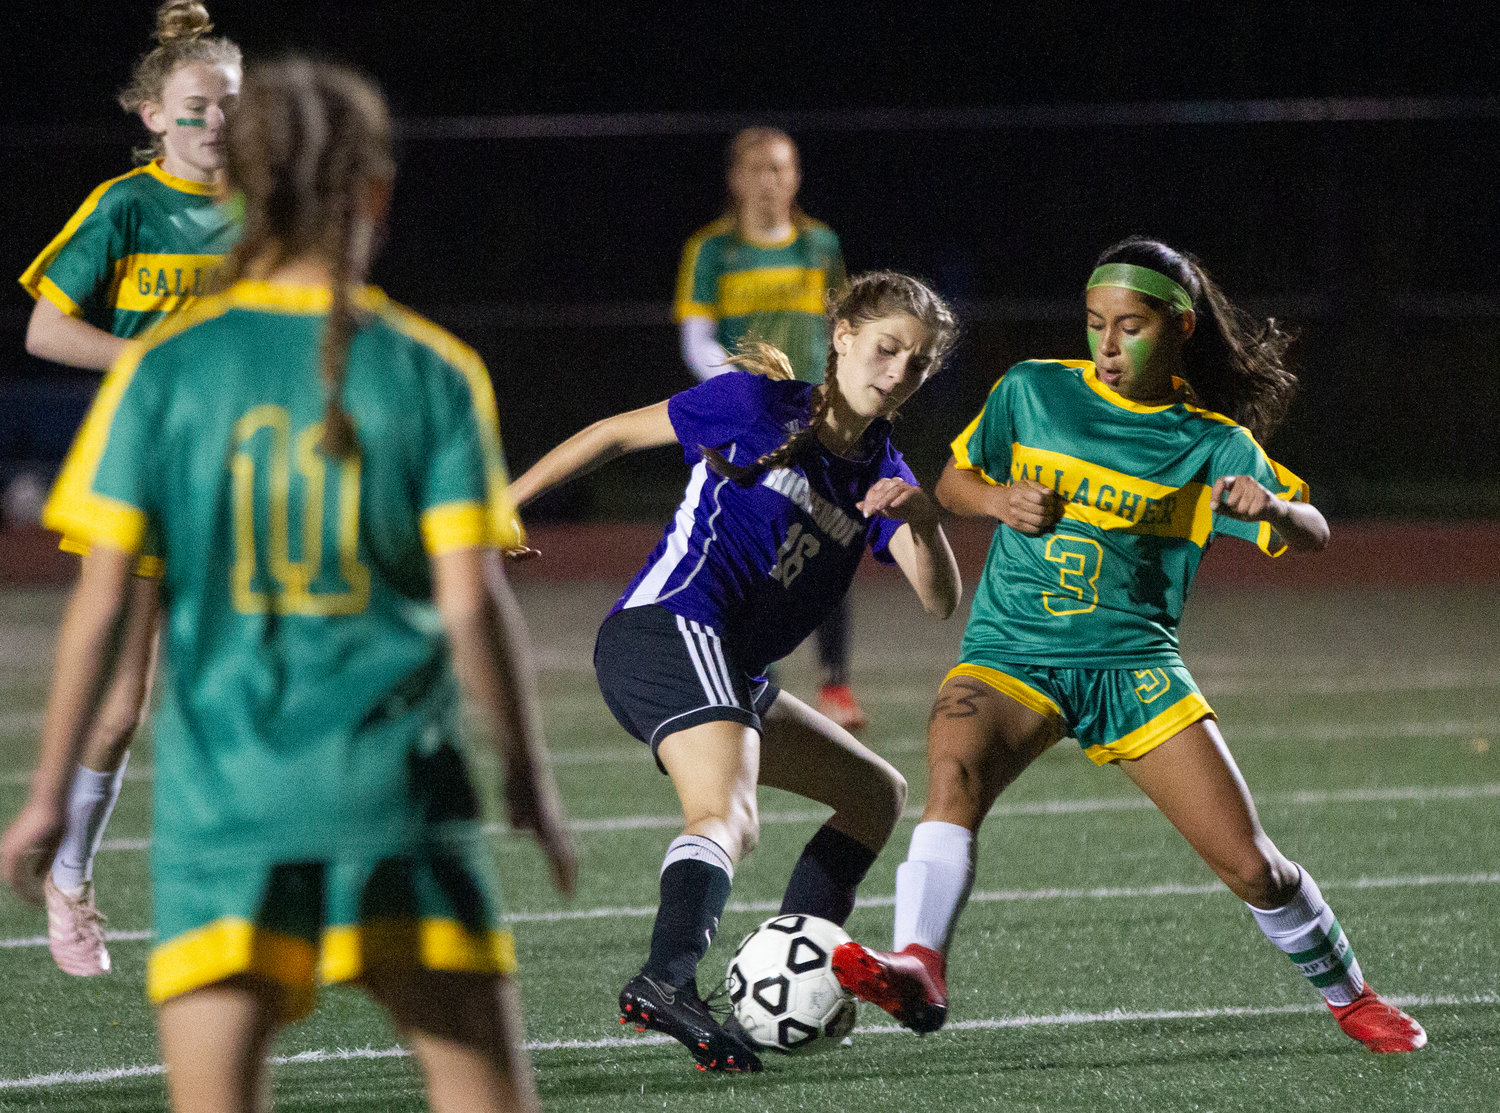 Kendra Ascoli fights for a loose ball at midfield.